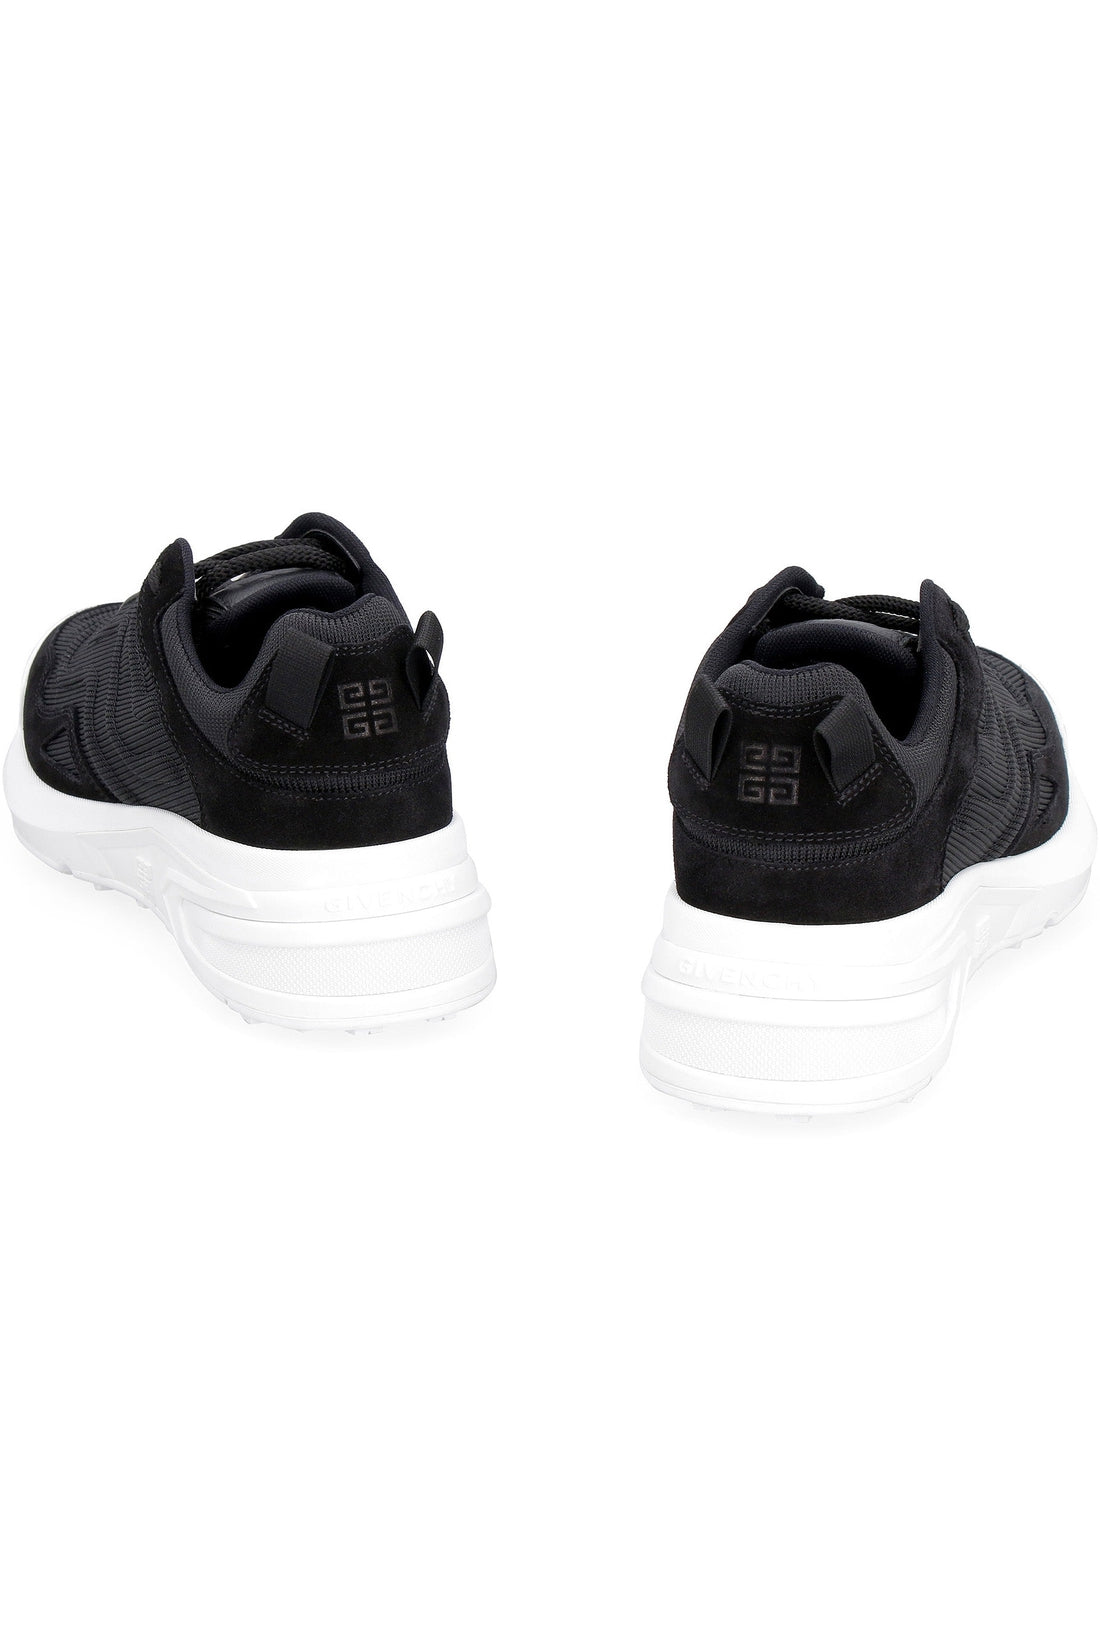 Givenchy-OUTLET-SALE-GIV 1 Light low-top sneakers-ARCHIVIST